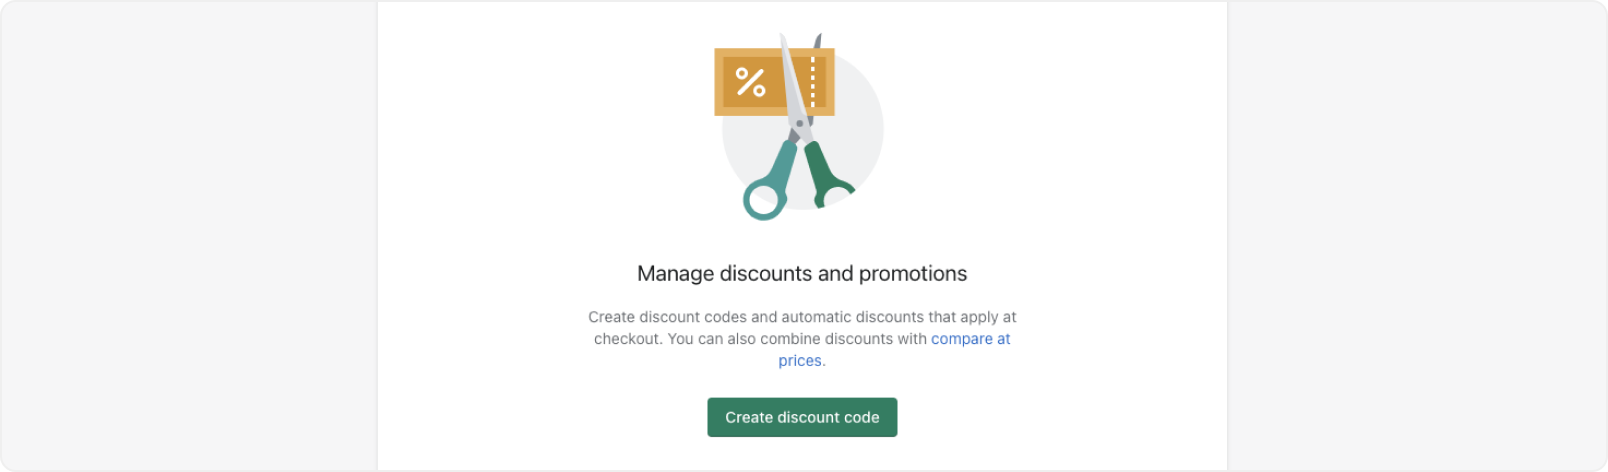 An illustration of scissors cutting a coupon to indicate a page for discount code administration that has no discount codes saved.